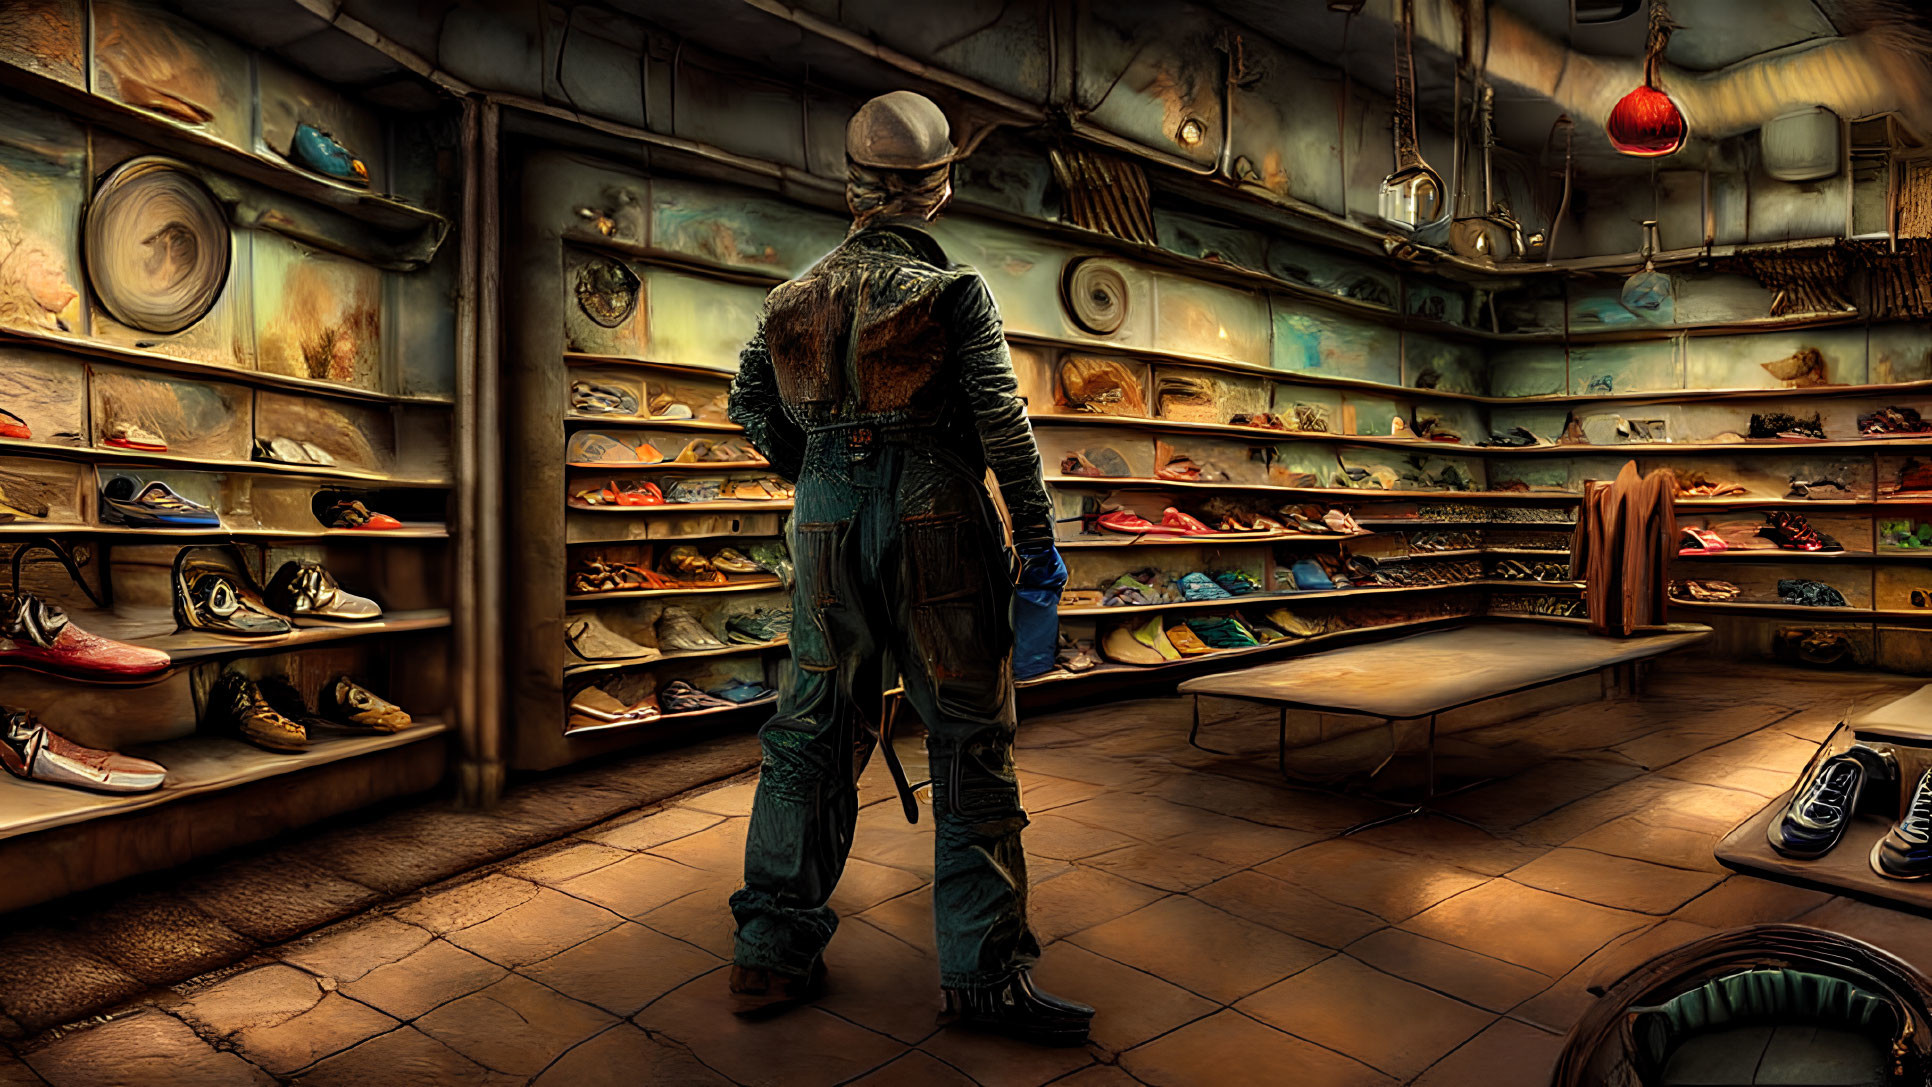 Person in Overalls Surrounded by Assorted Shoes on Wooden Shelves